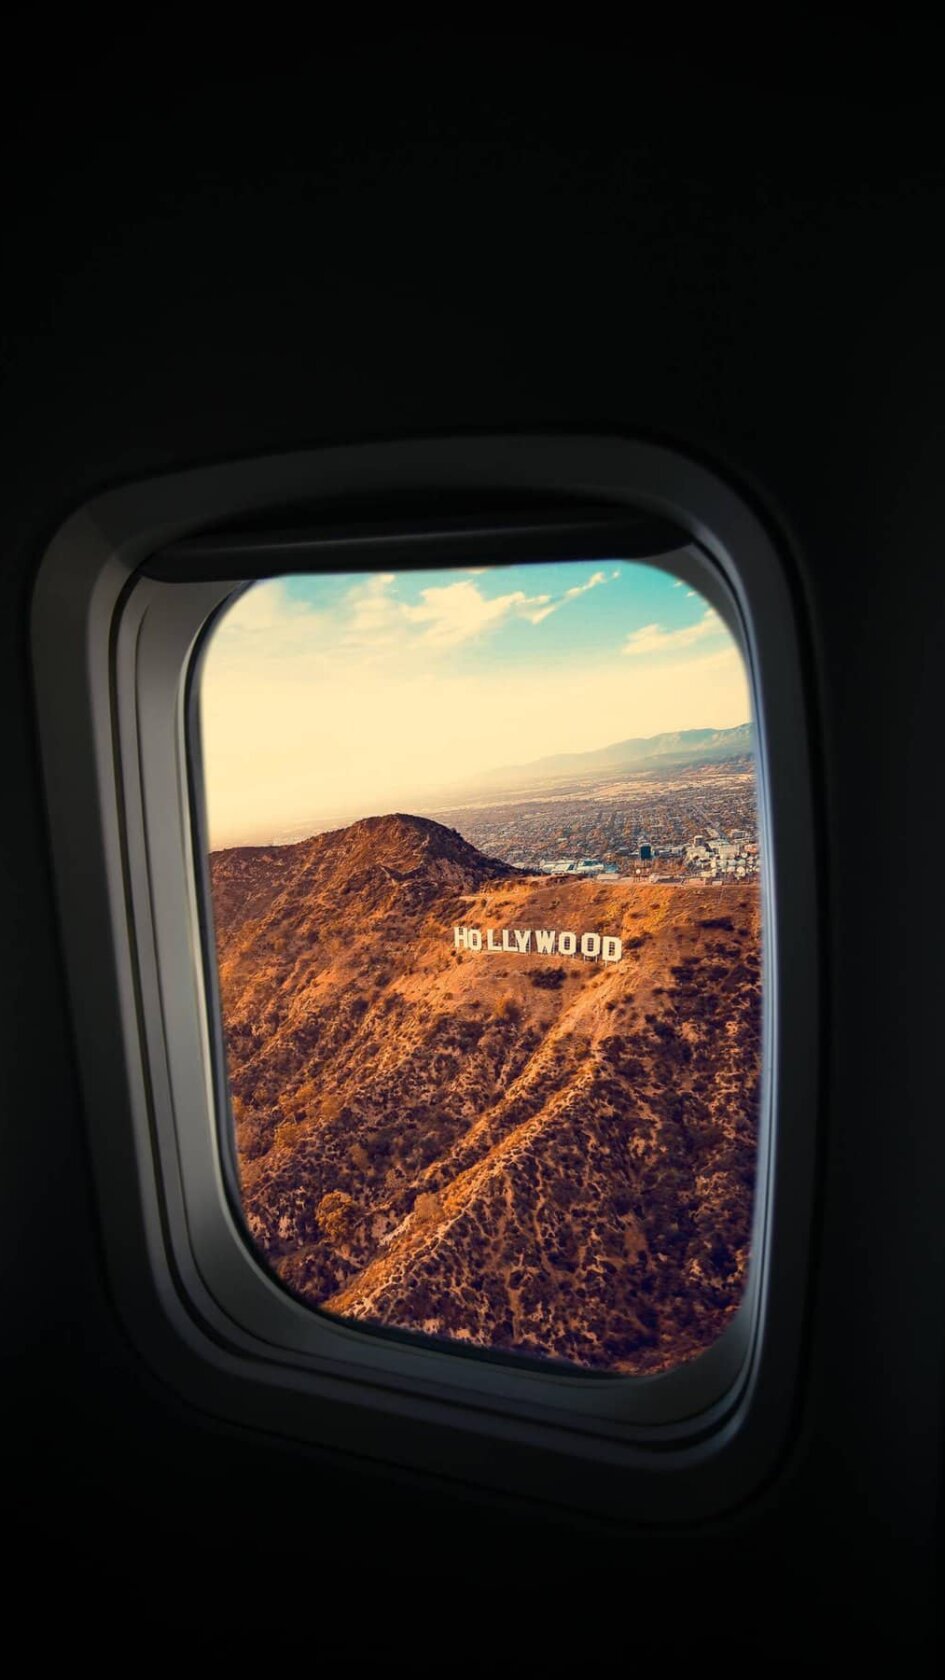 An awesome shot of the Hollywood sign from an airplane.